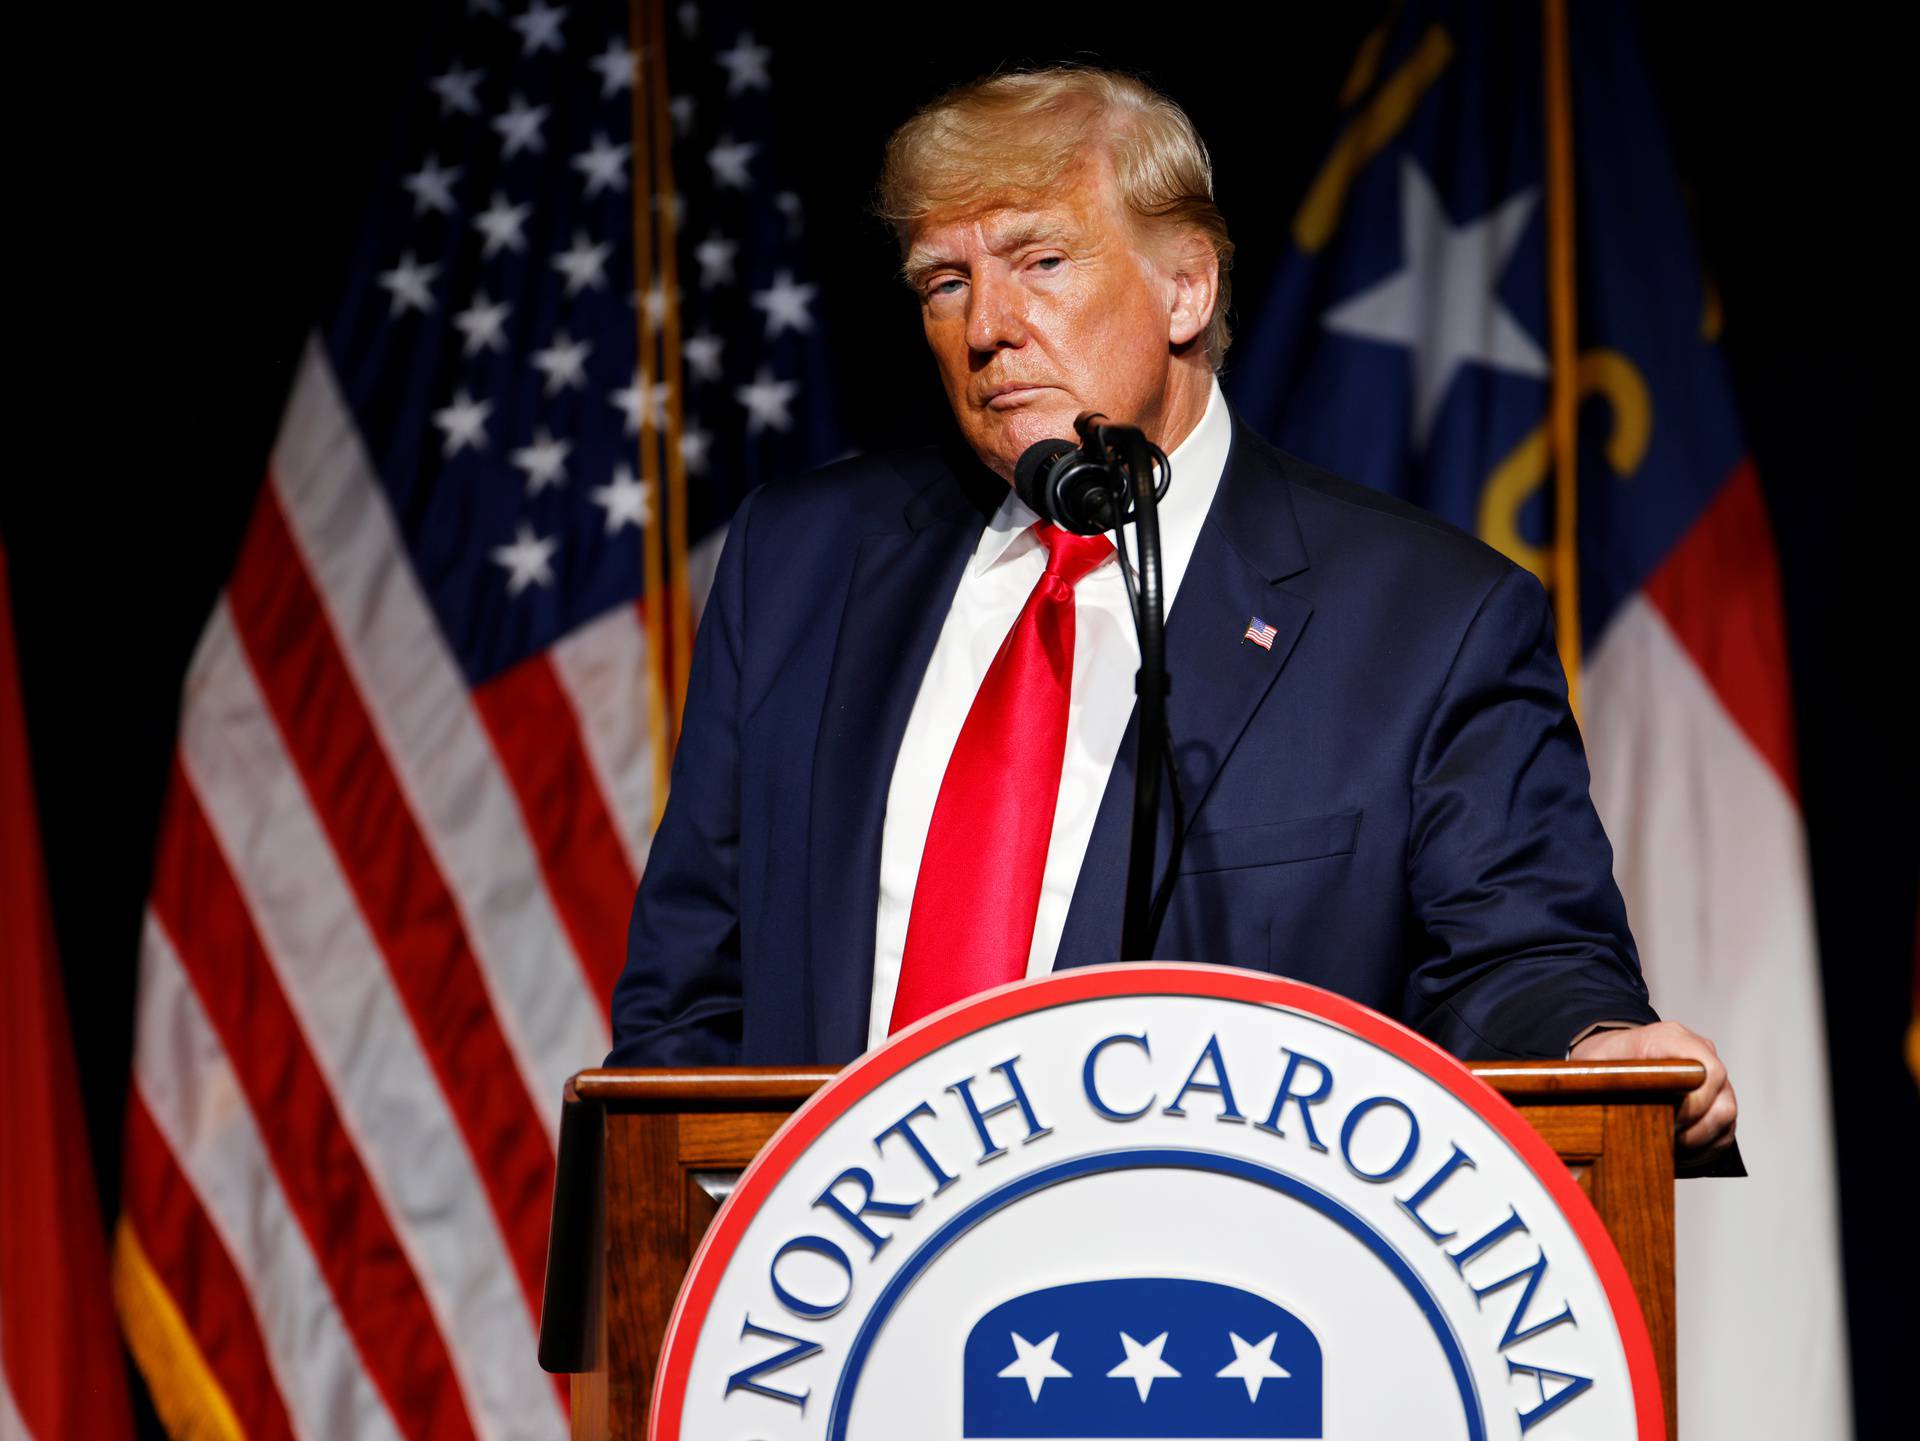 Former U.S. President Donald Trump pauses while speaking at the North Carolina GOP convention dinner in Greenville